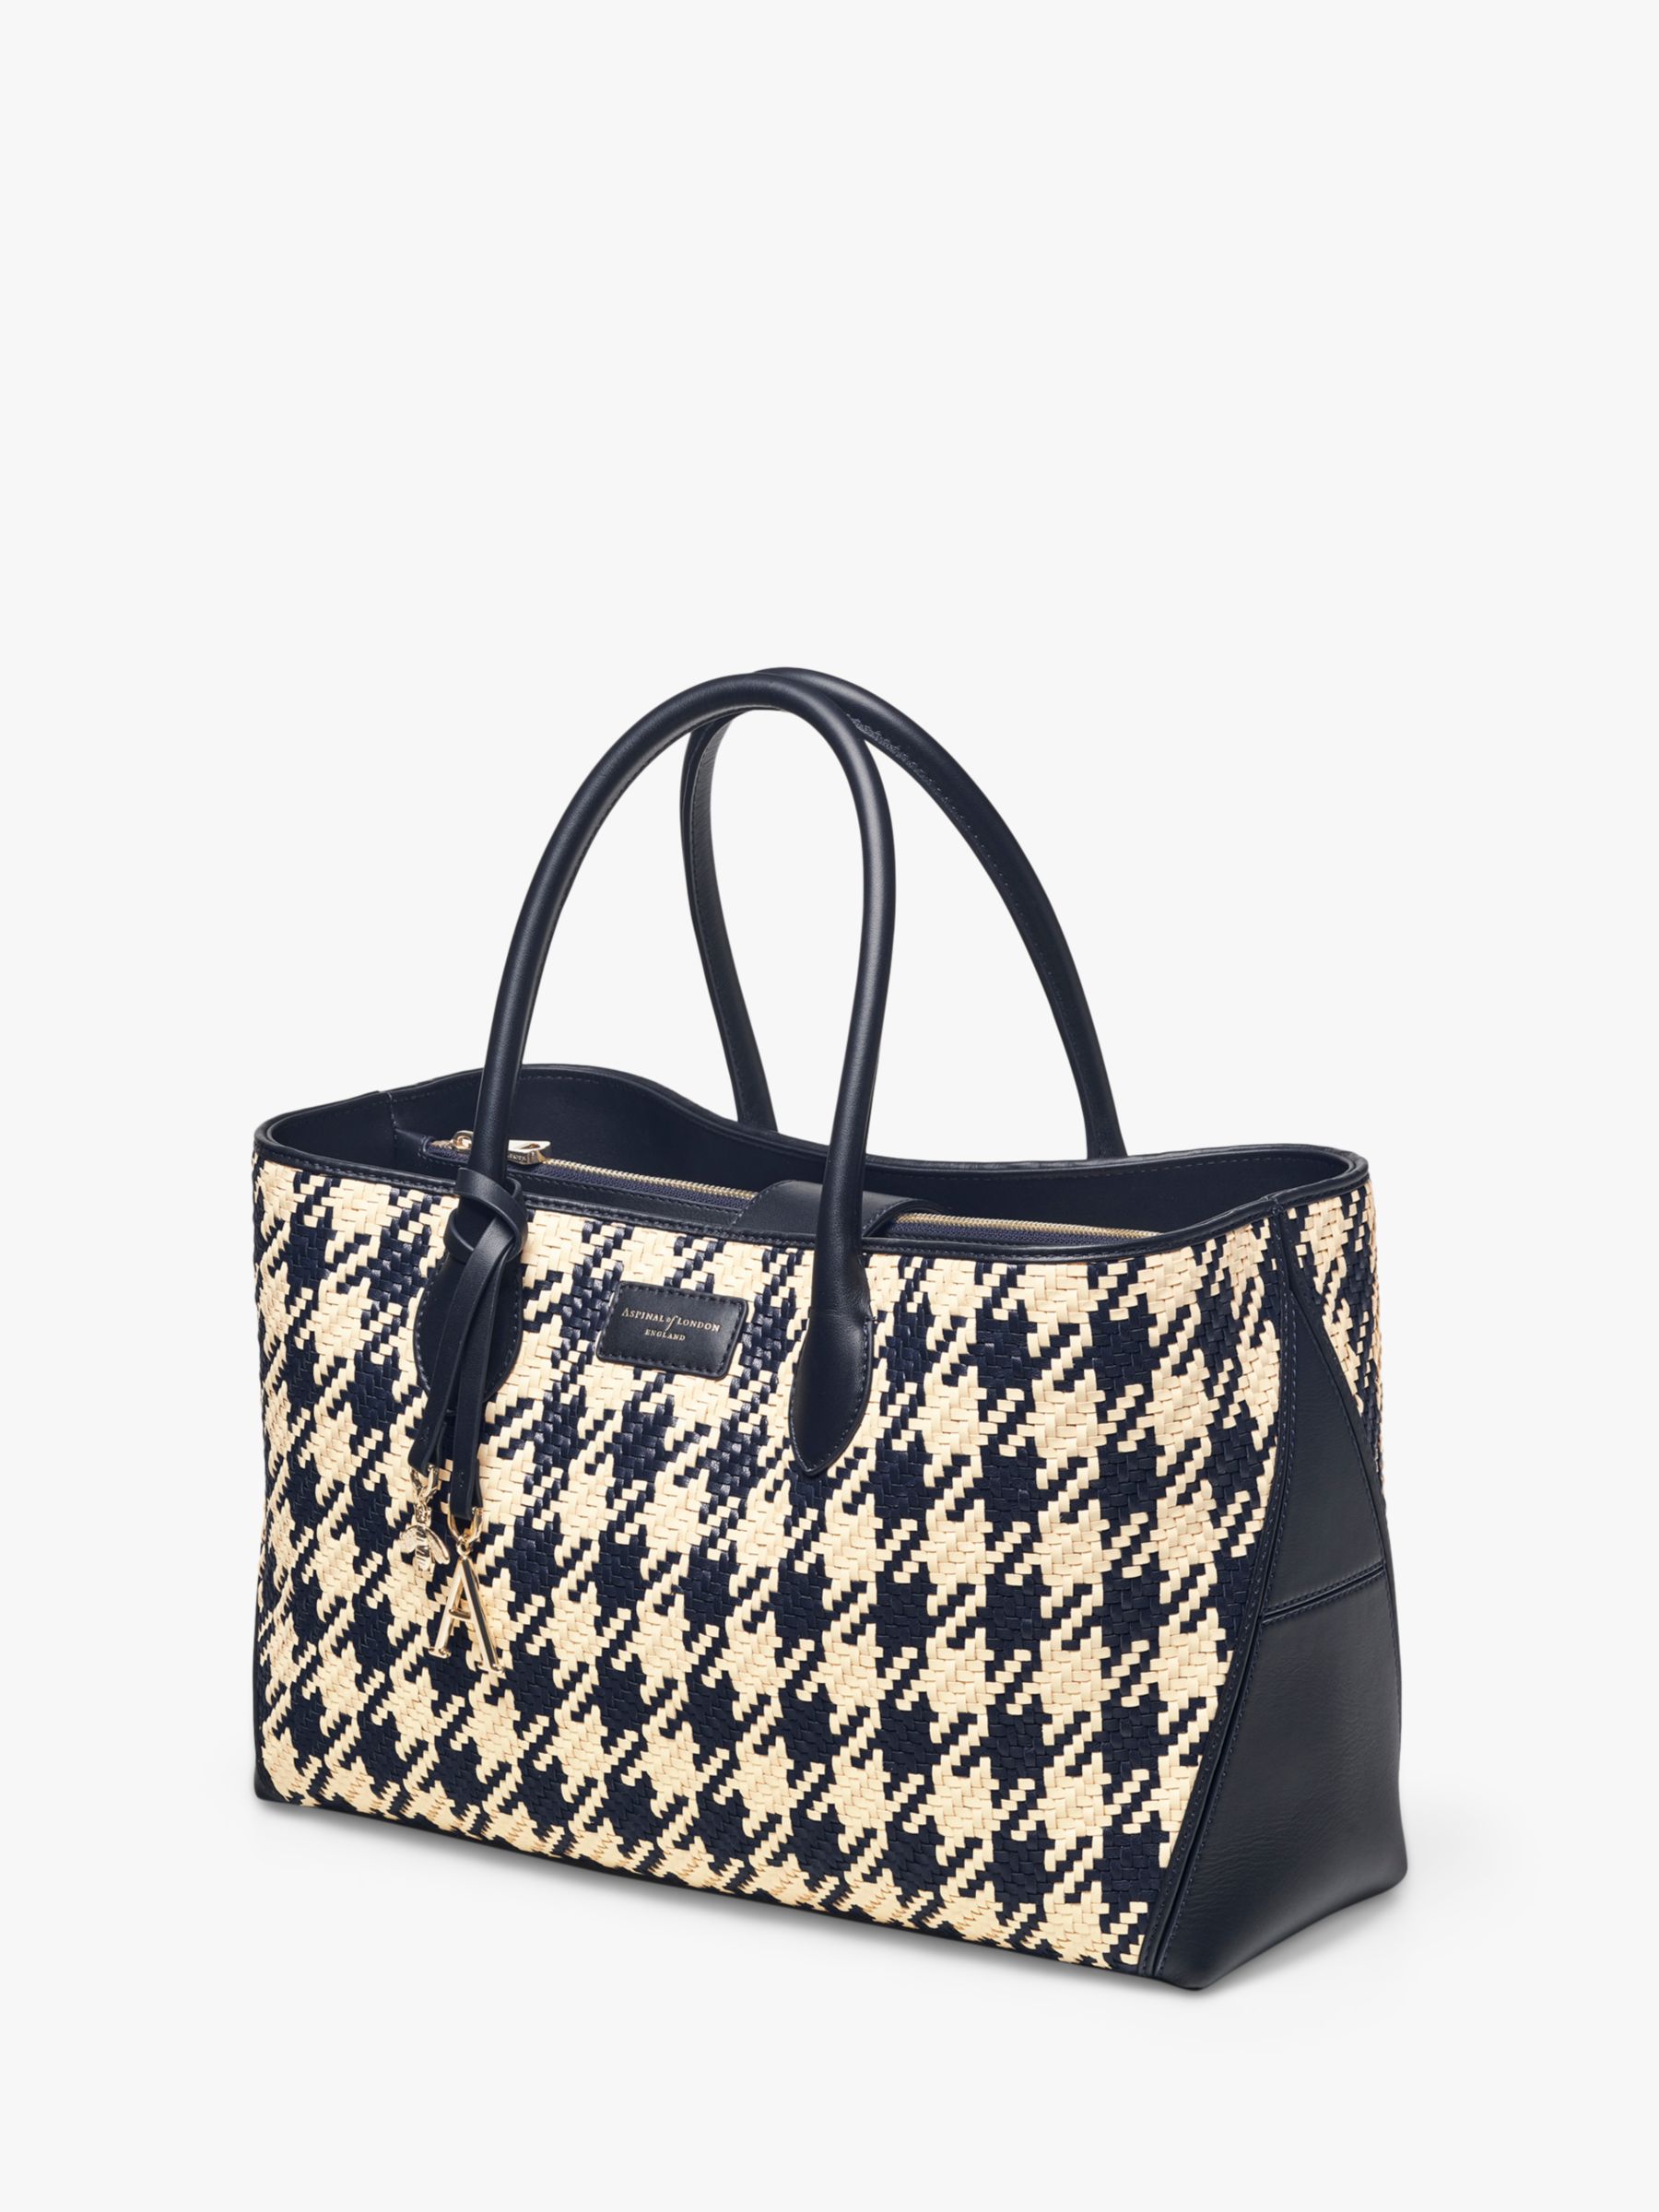 Aspinal of London Dogtooth Weave Leather Tote Bag, Navy/Ivory